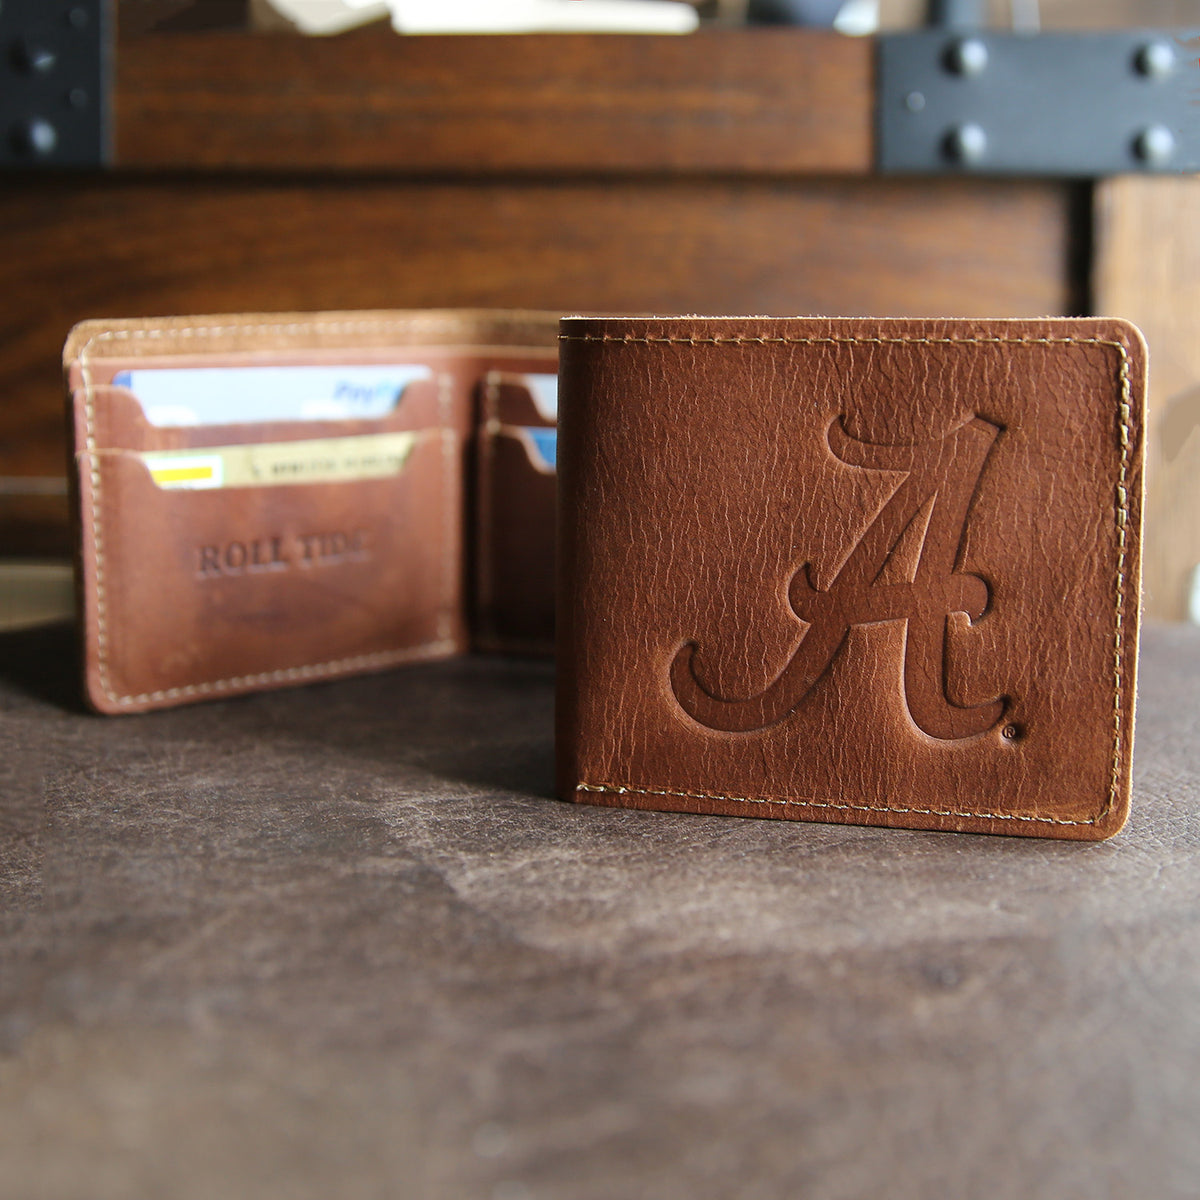 The Officially Licensed Alabama Big Dixie Fine Leather BiFold Wallet